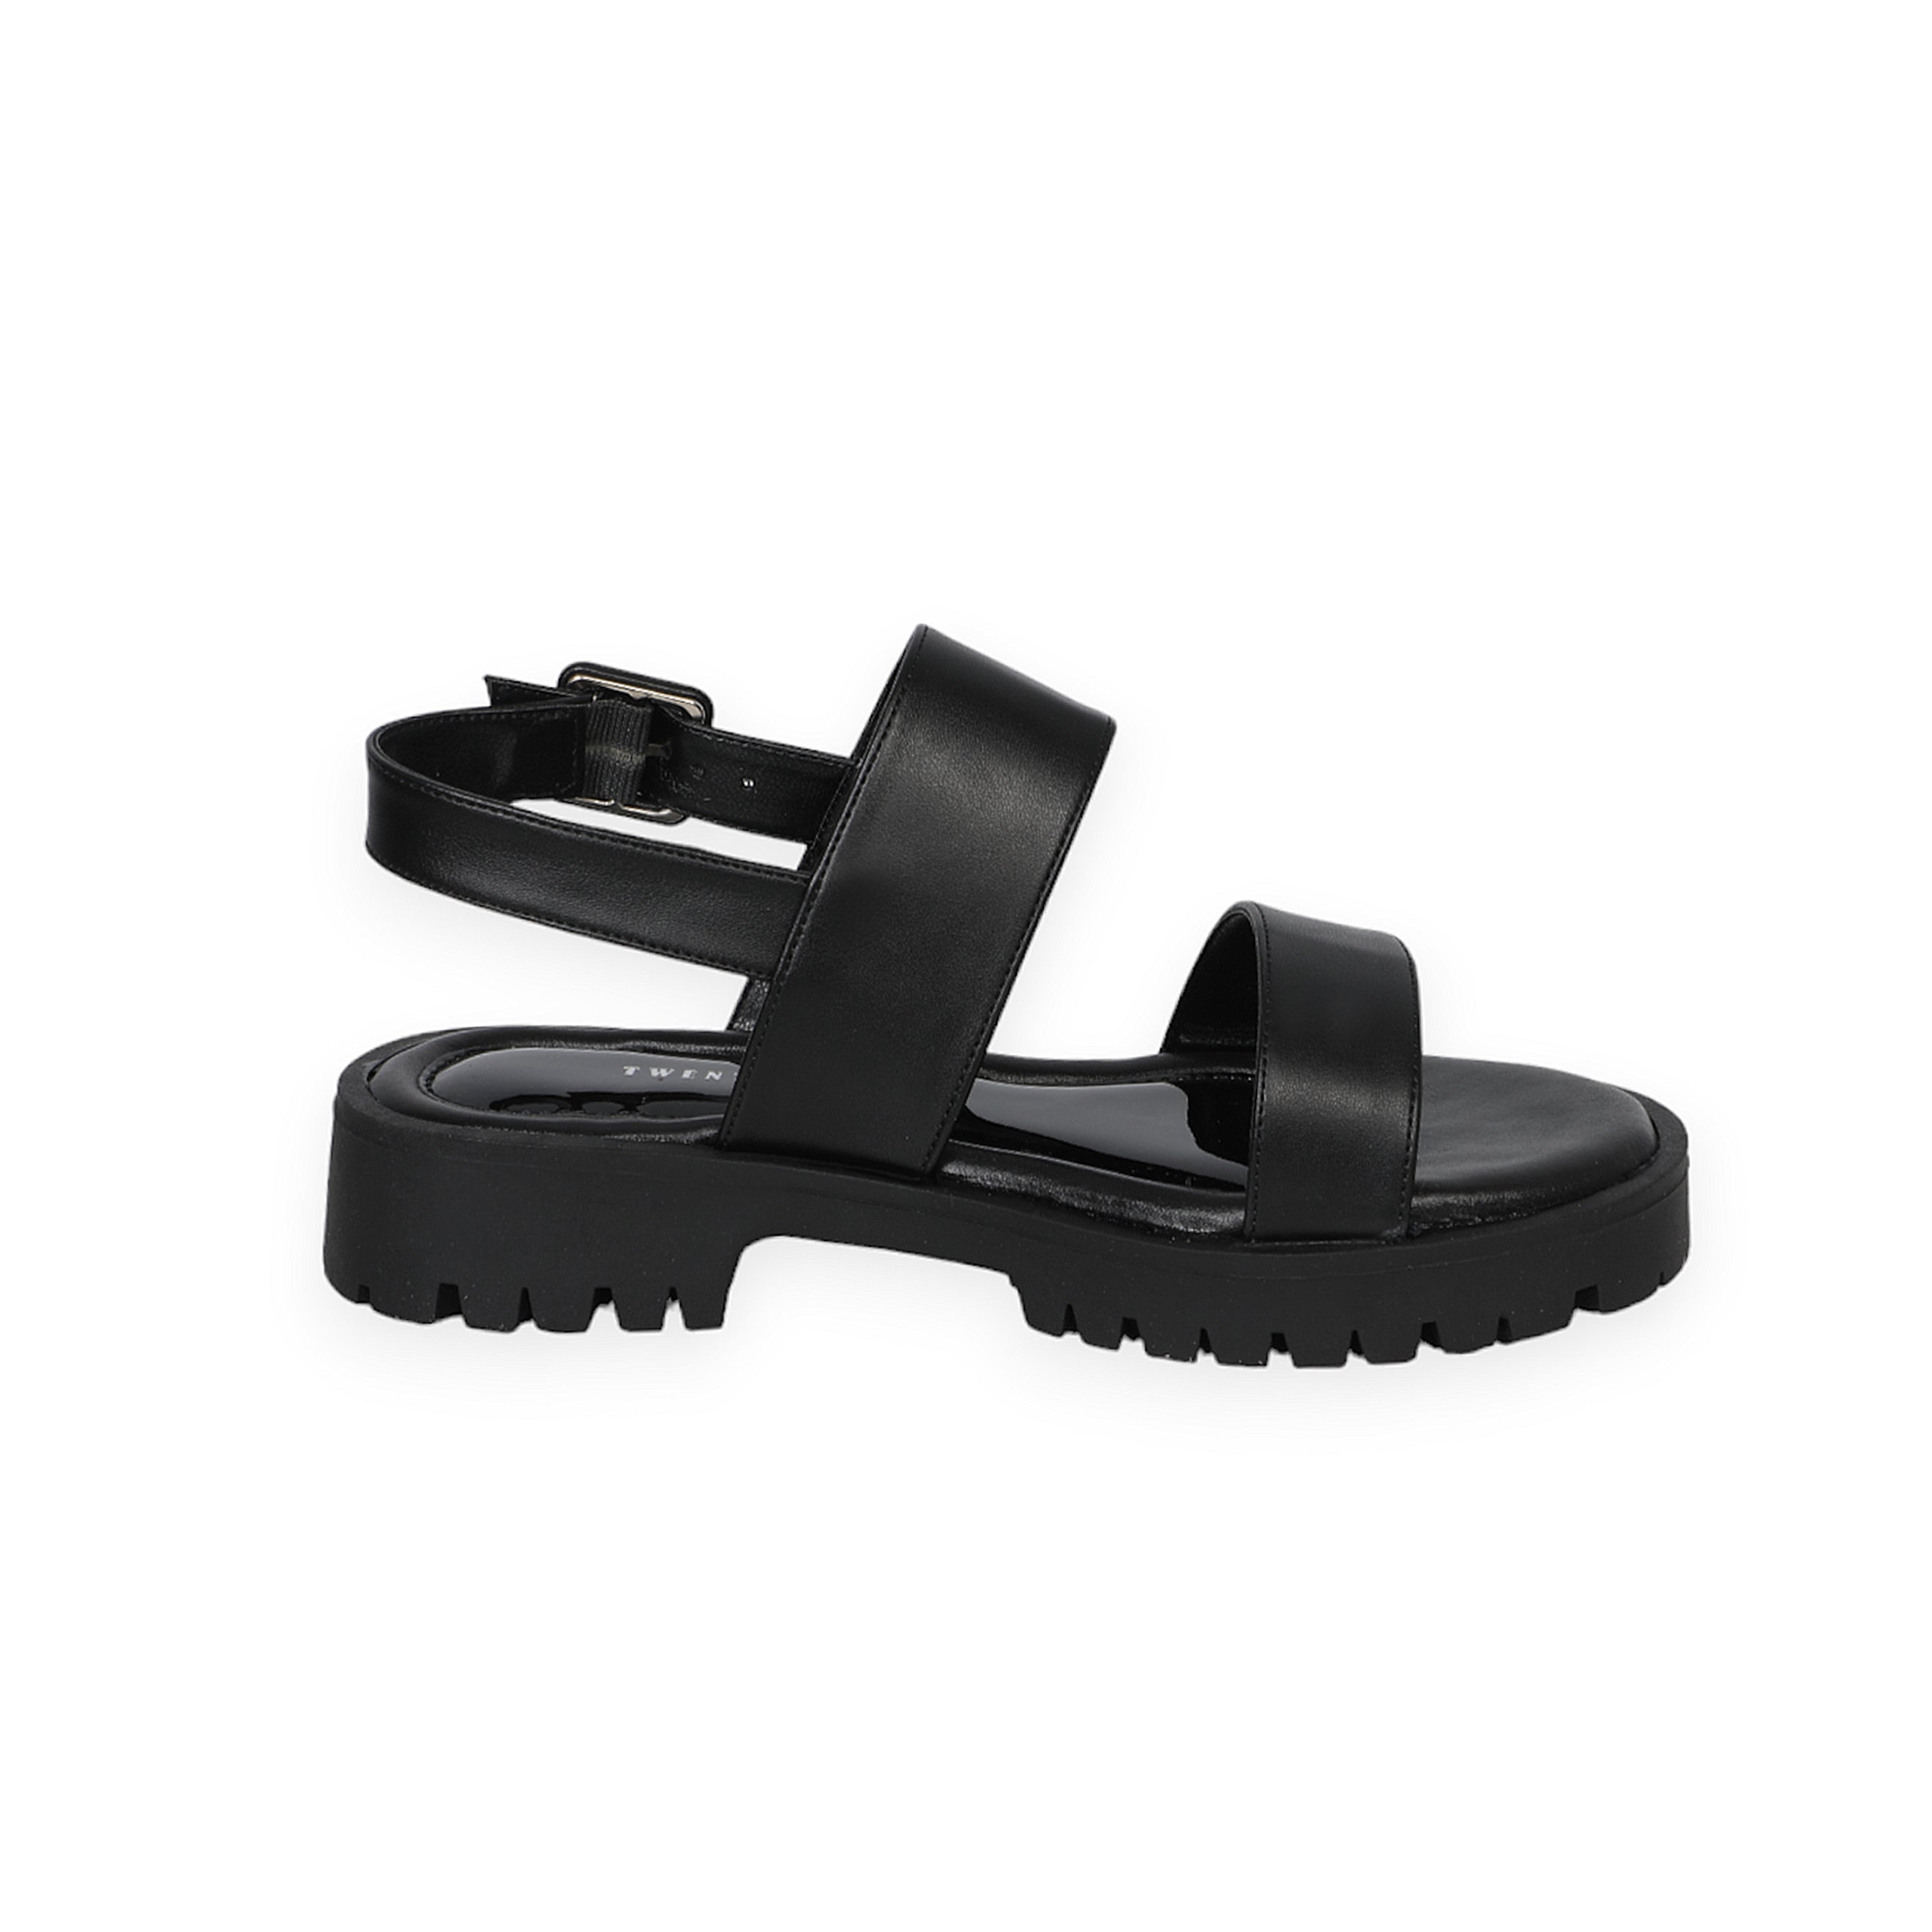 Comfortable Black Sandals With Ankle Strap